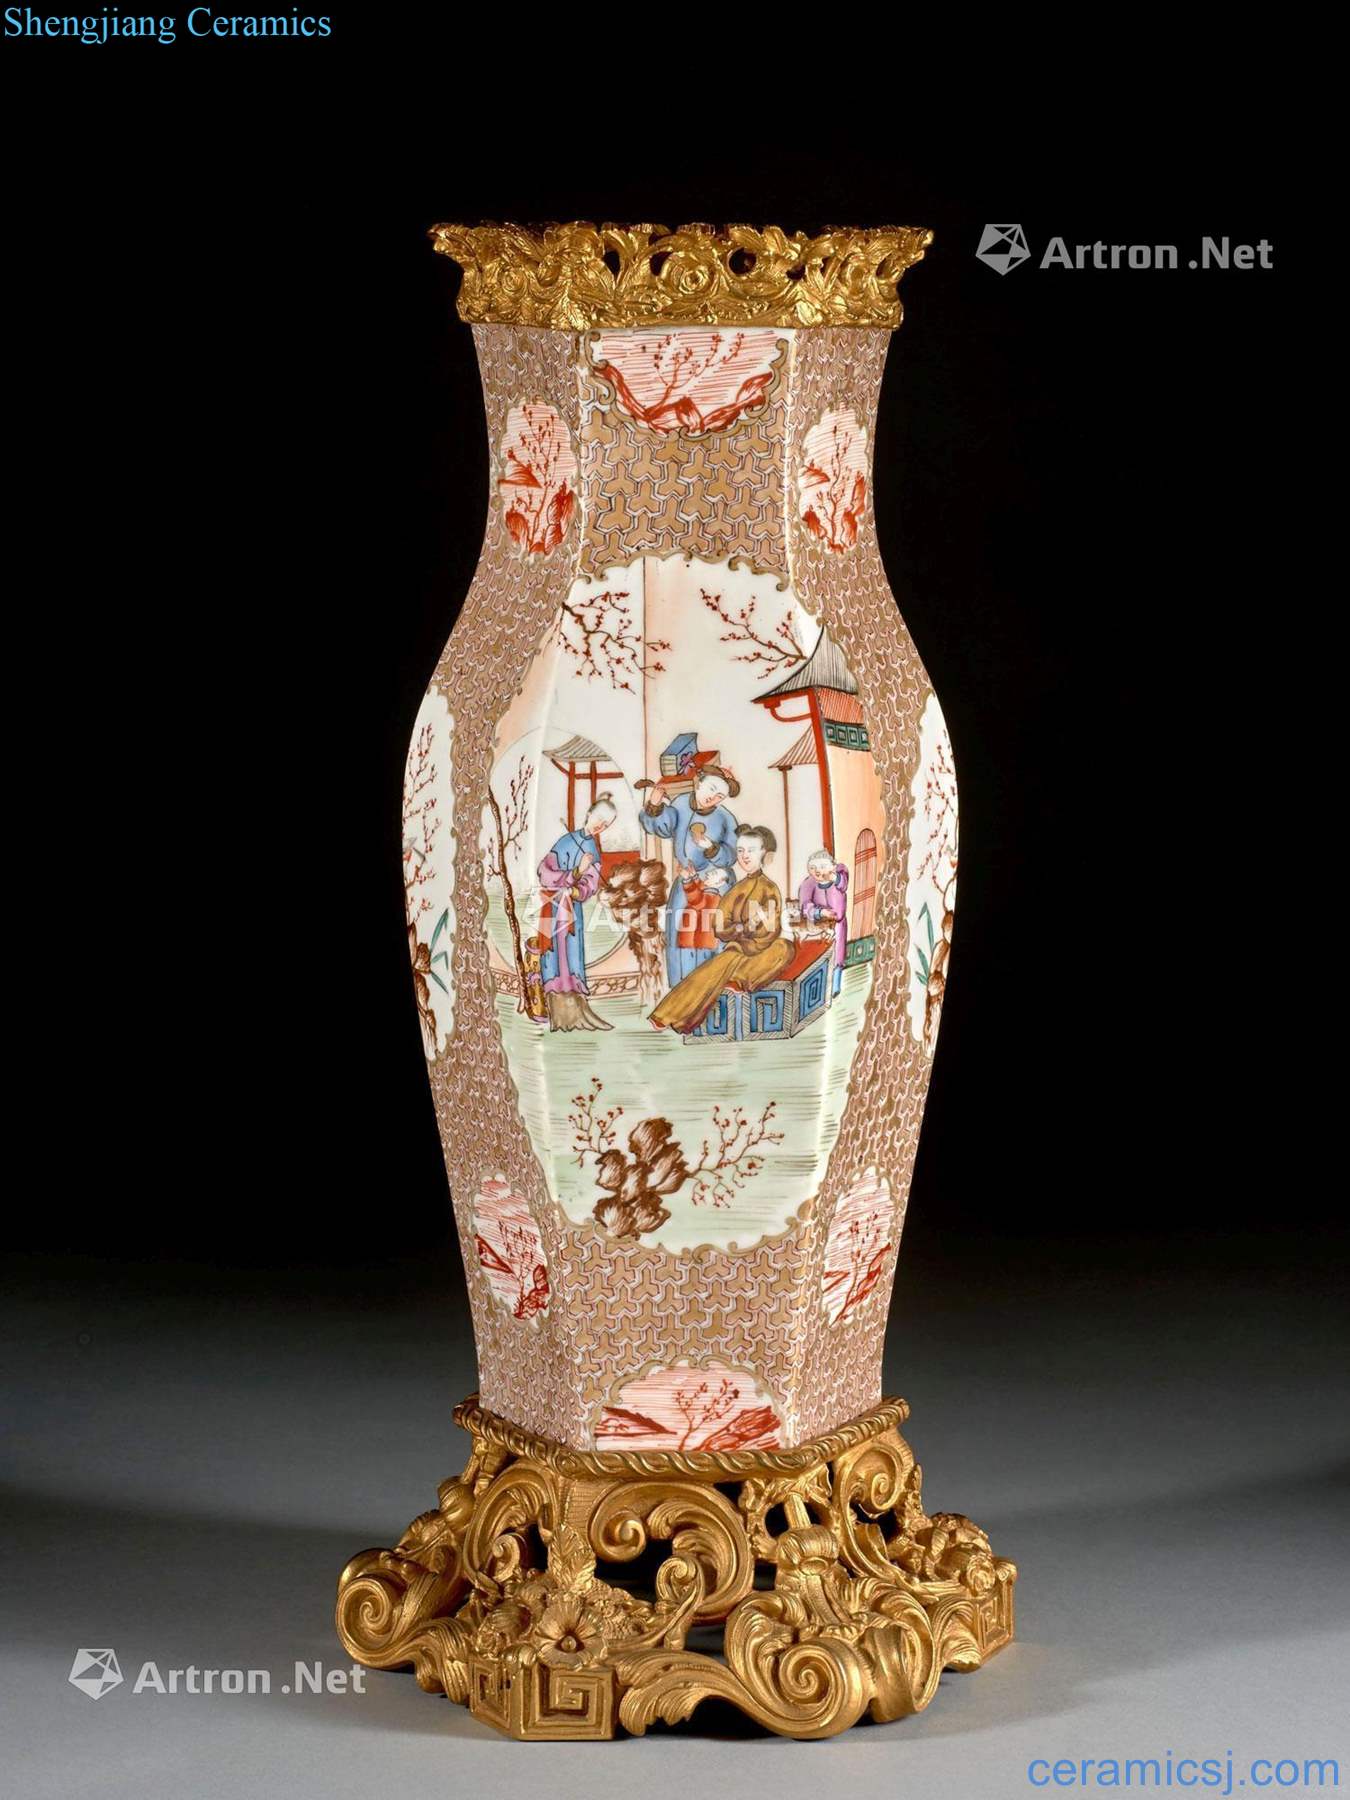 CHINA, the QING DYNASTY, 18 th CENTURY A FAMILLE ROSE ORMOLU MOUNTED HEXAGONAL PORCELAIN VASE